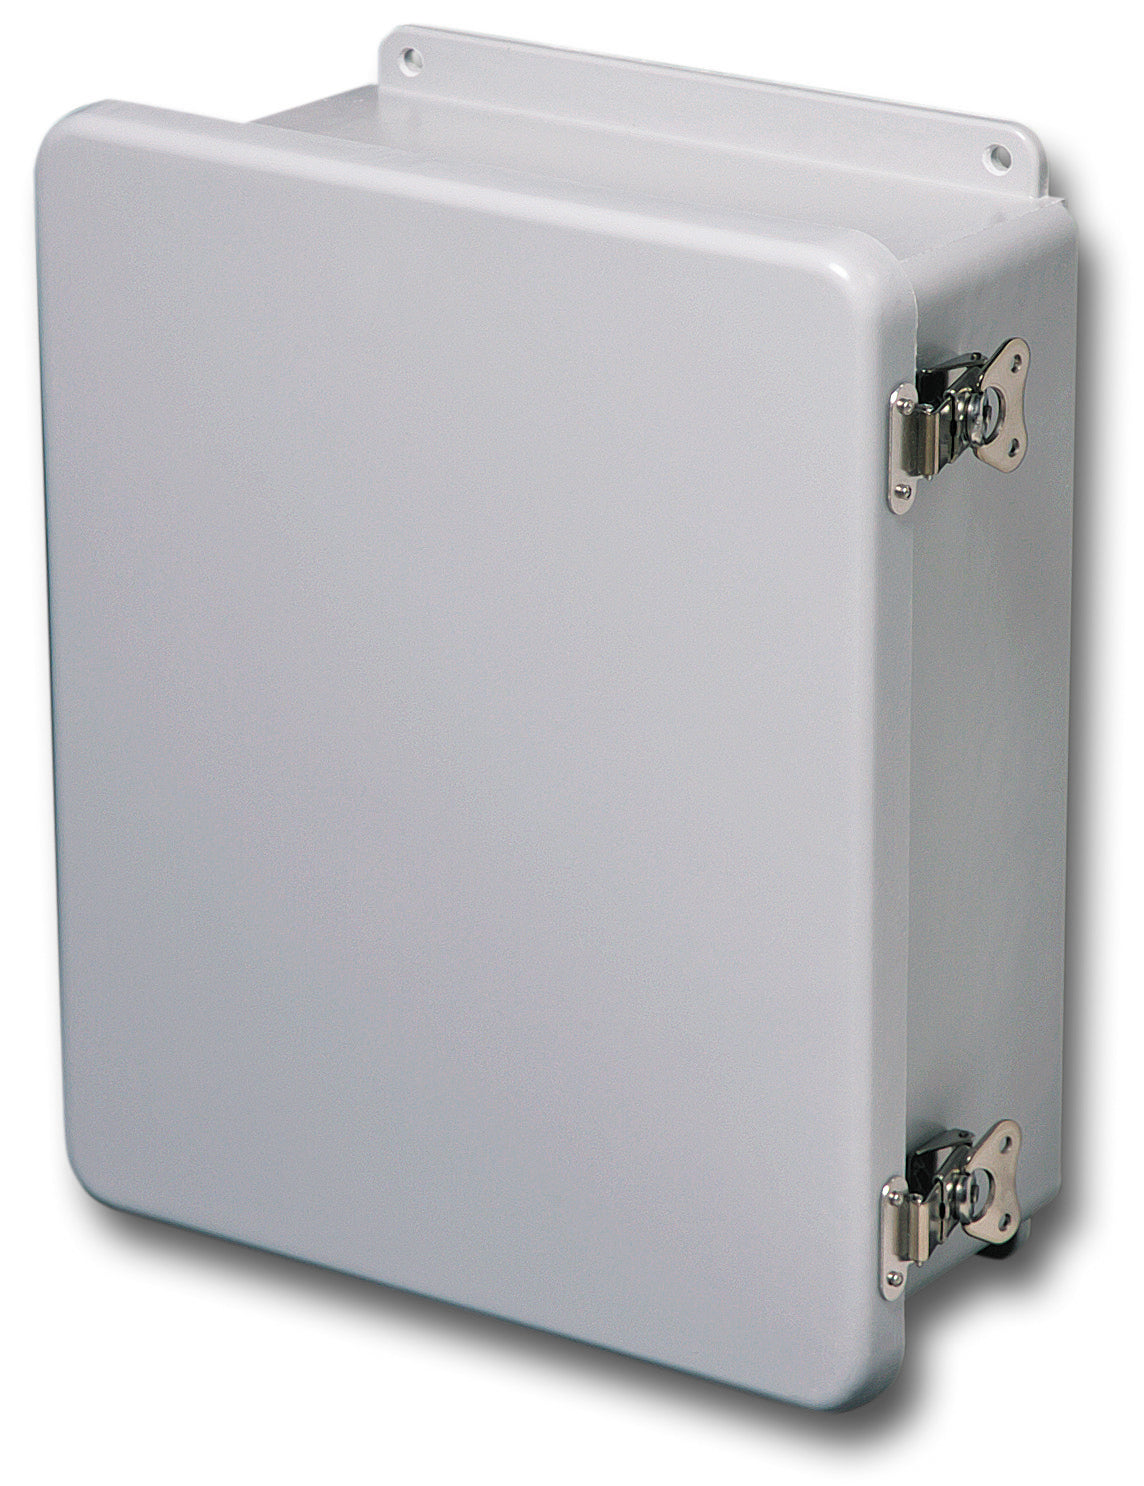 N4X   FG   CHTL Series     Fiberglass Enclosures with Hinged Cover and Twist Latch-1